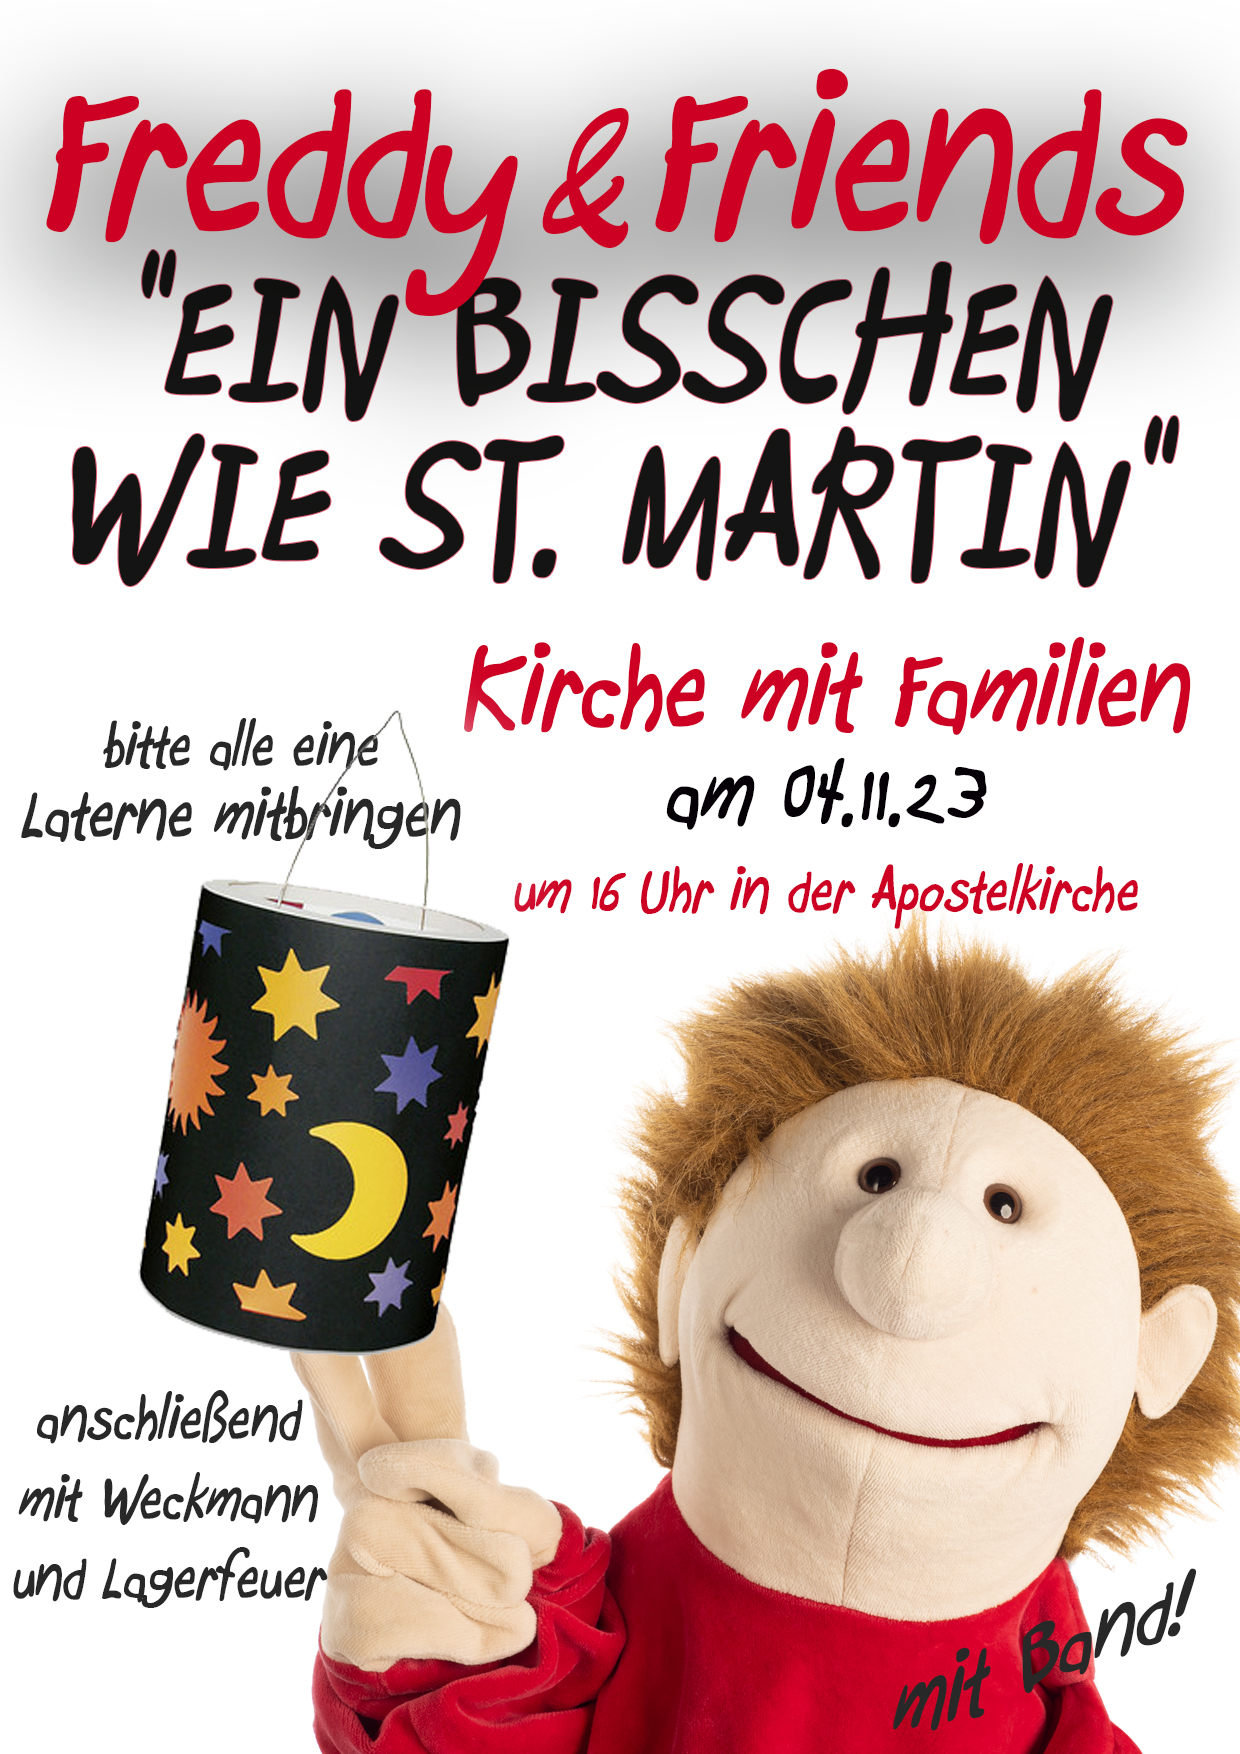 Read more about the article Freddy & Friends am 04.11.2023 mit Laternen, Weckmann und Lagerfeuer